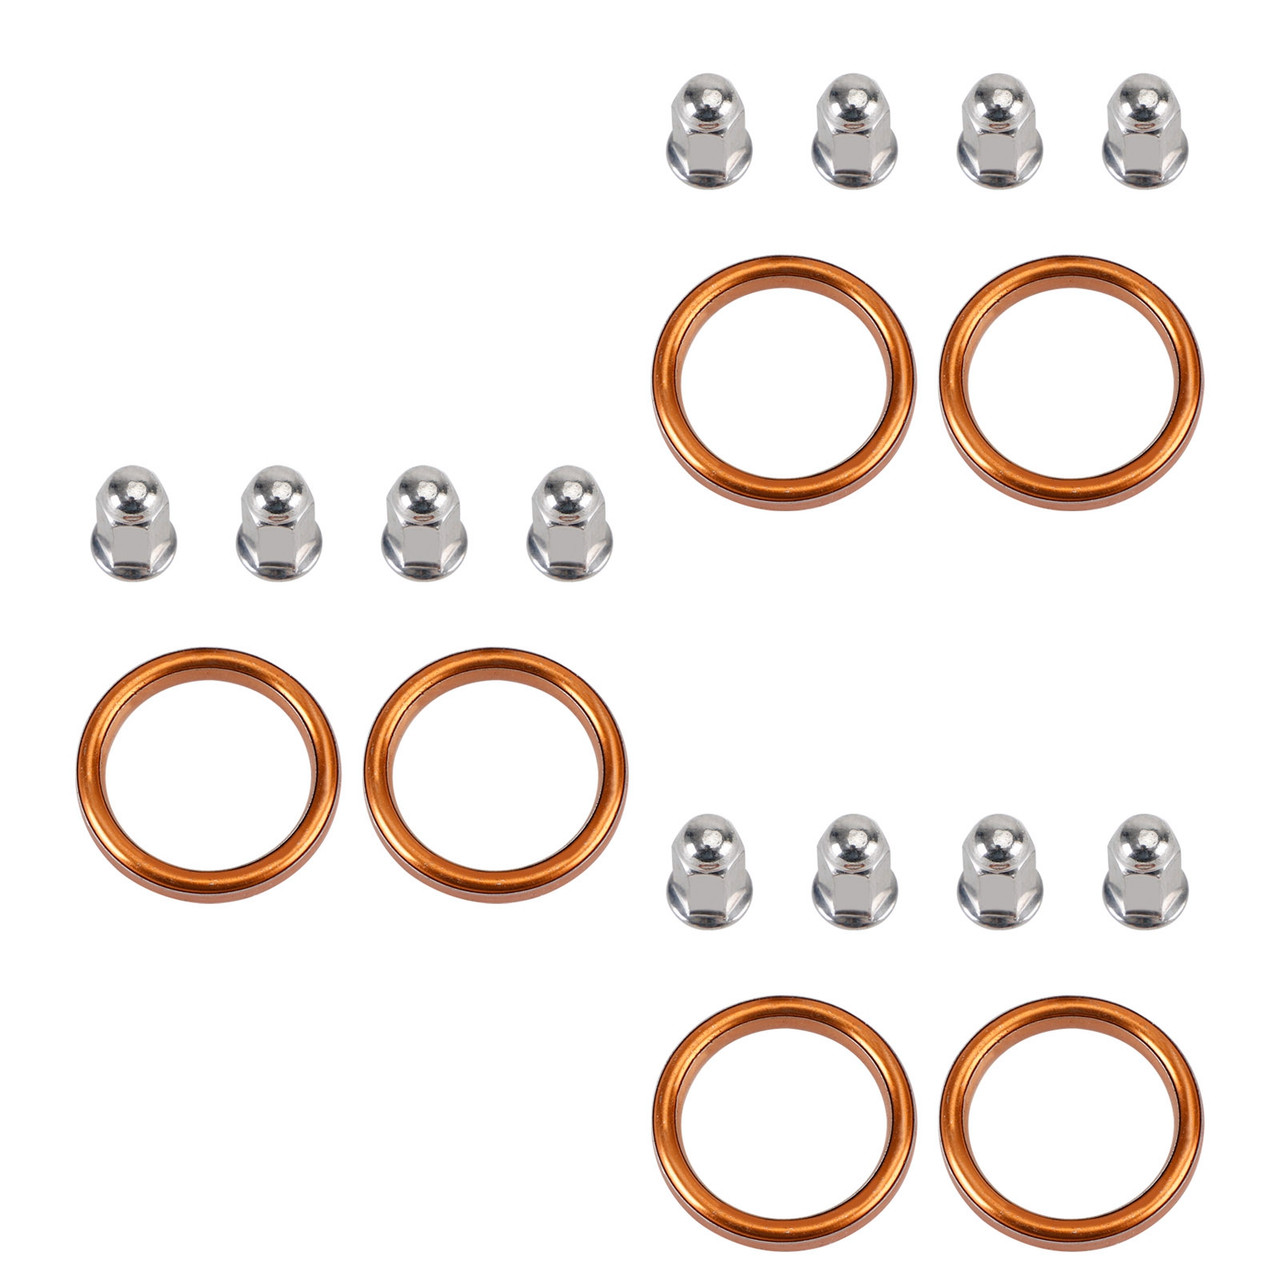 6 Exhaust Gaskets & 12 Cap Nuts For Honda Goldwing GL1500 Valkyrie GL1800 Rune